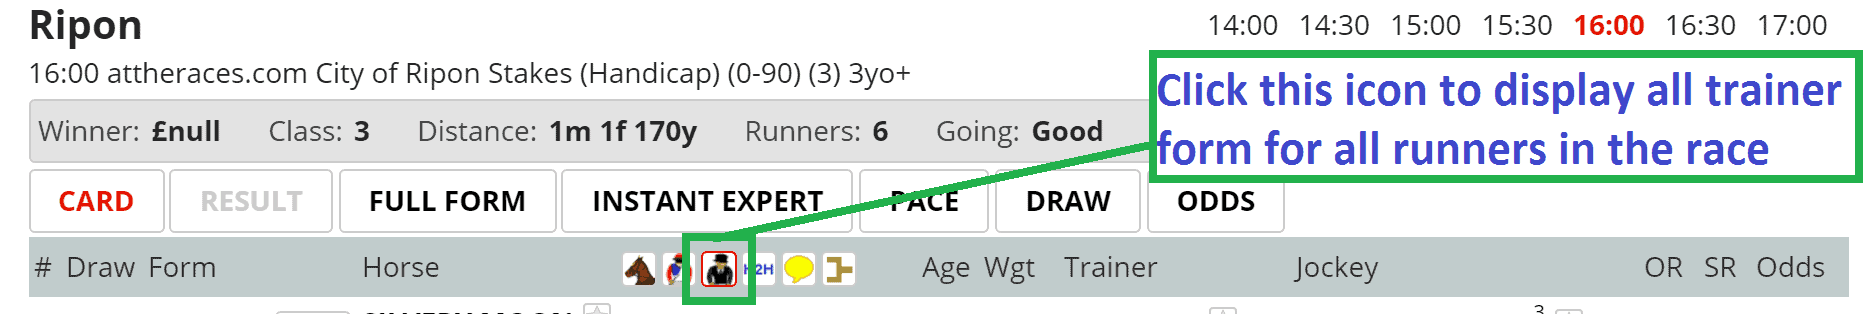 View all trainer form in a race by clicking this icon